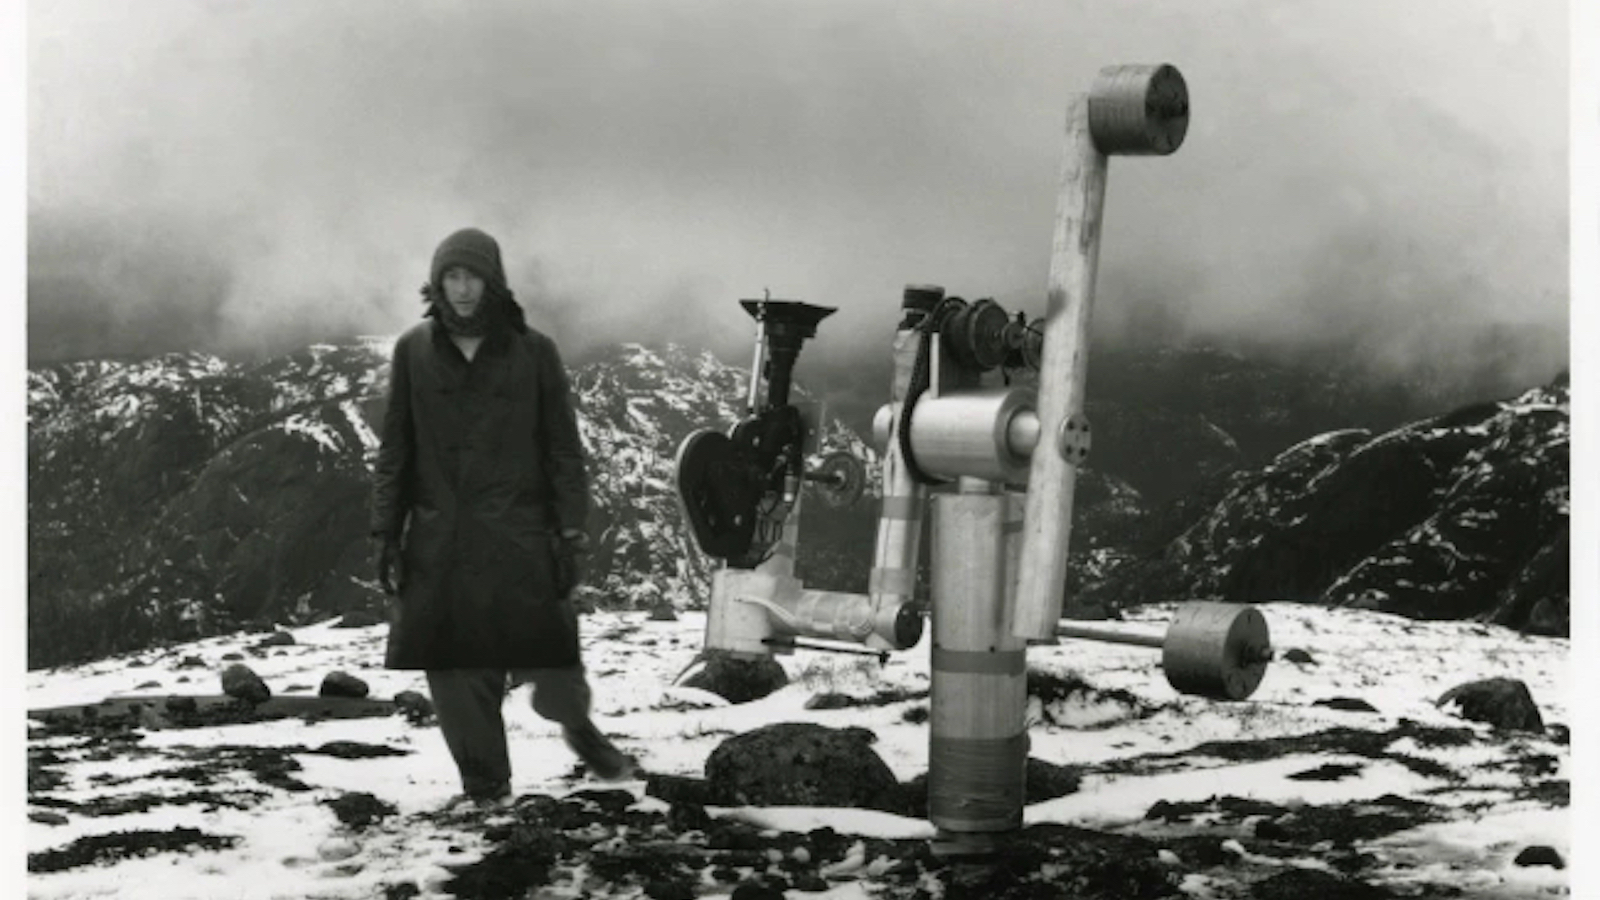 A man stands on a mountaintop next to an apparatus with a telescope